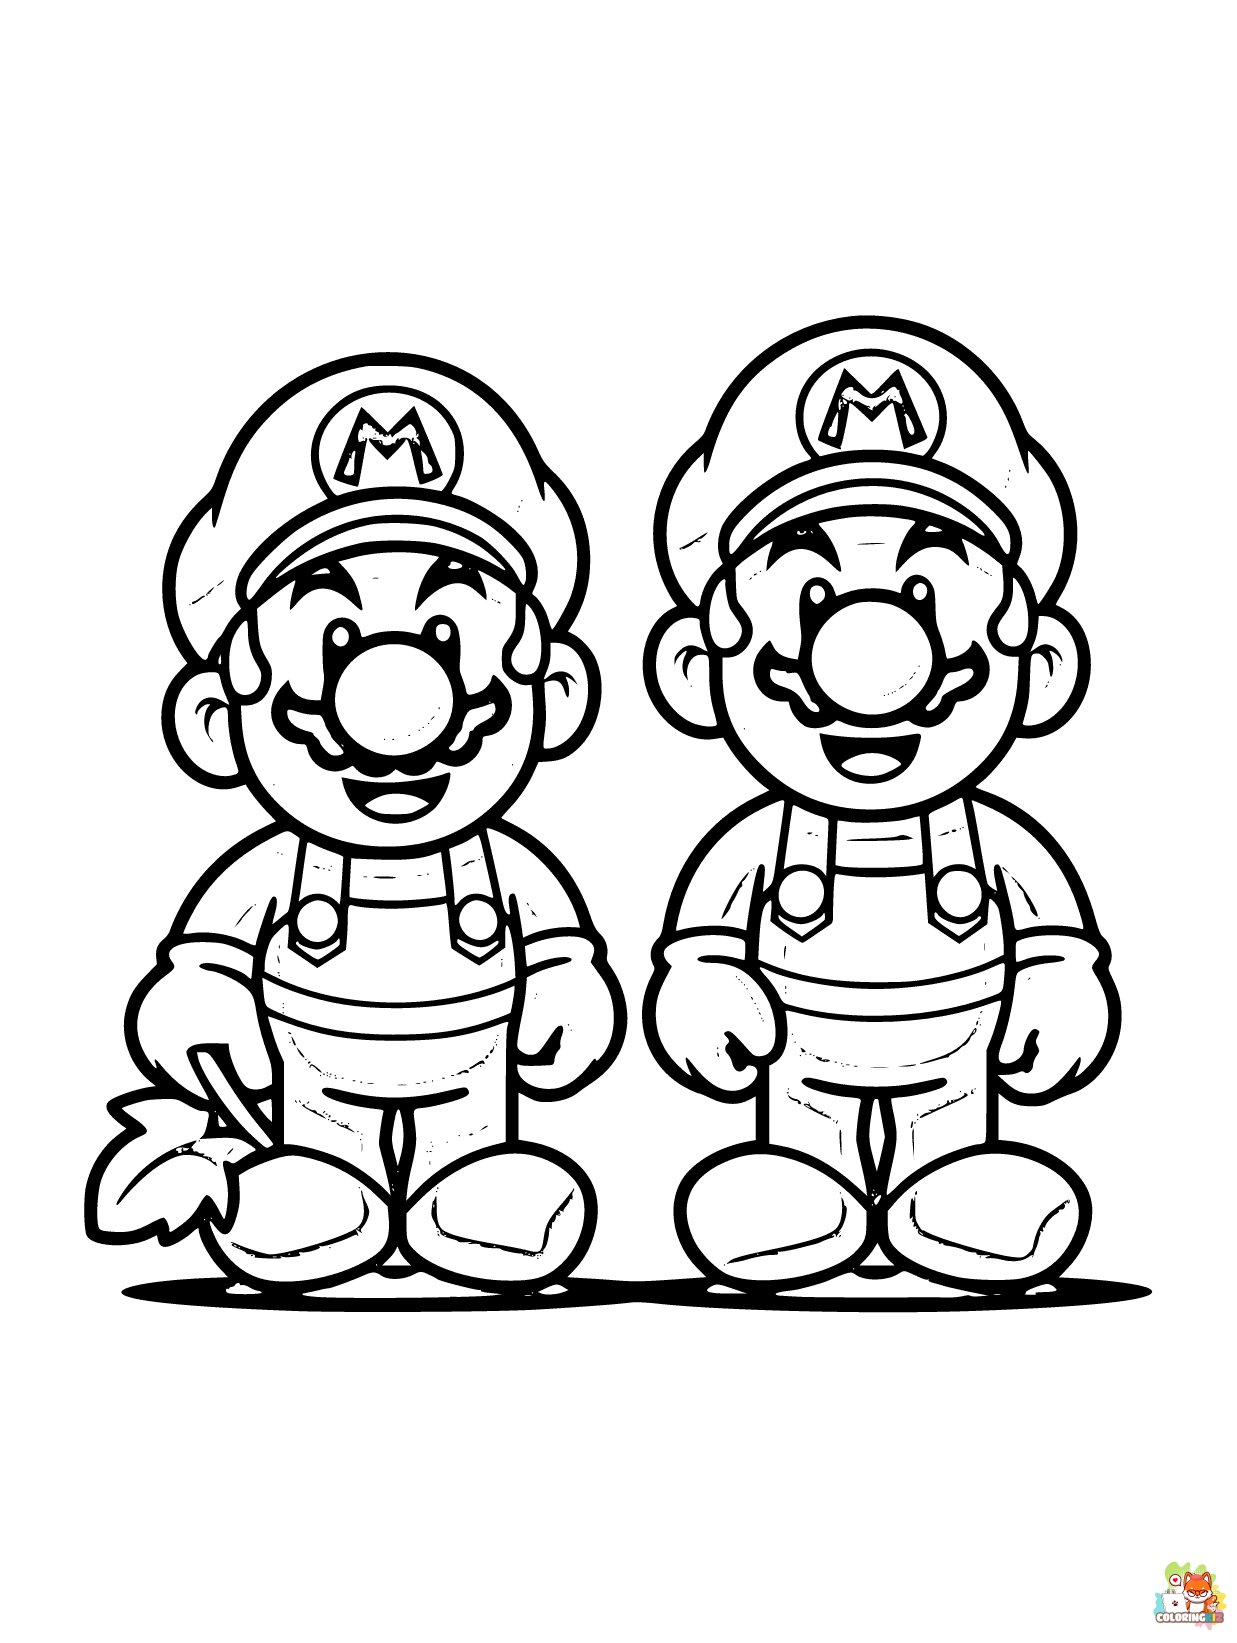 Free Mario and Luigi coloring pages for kids